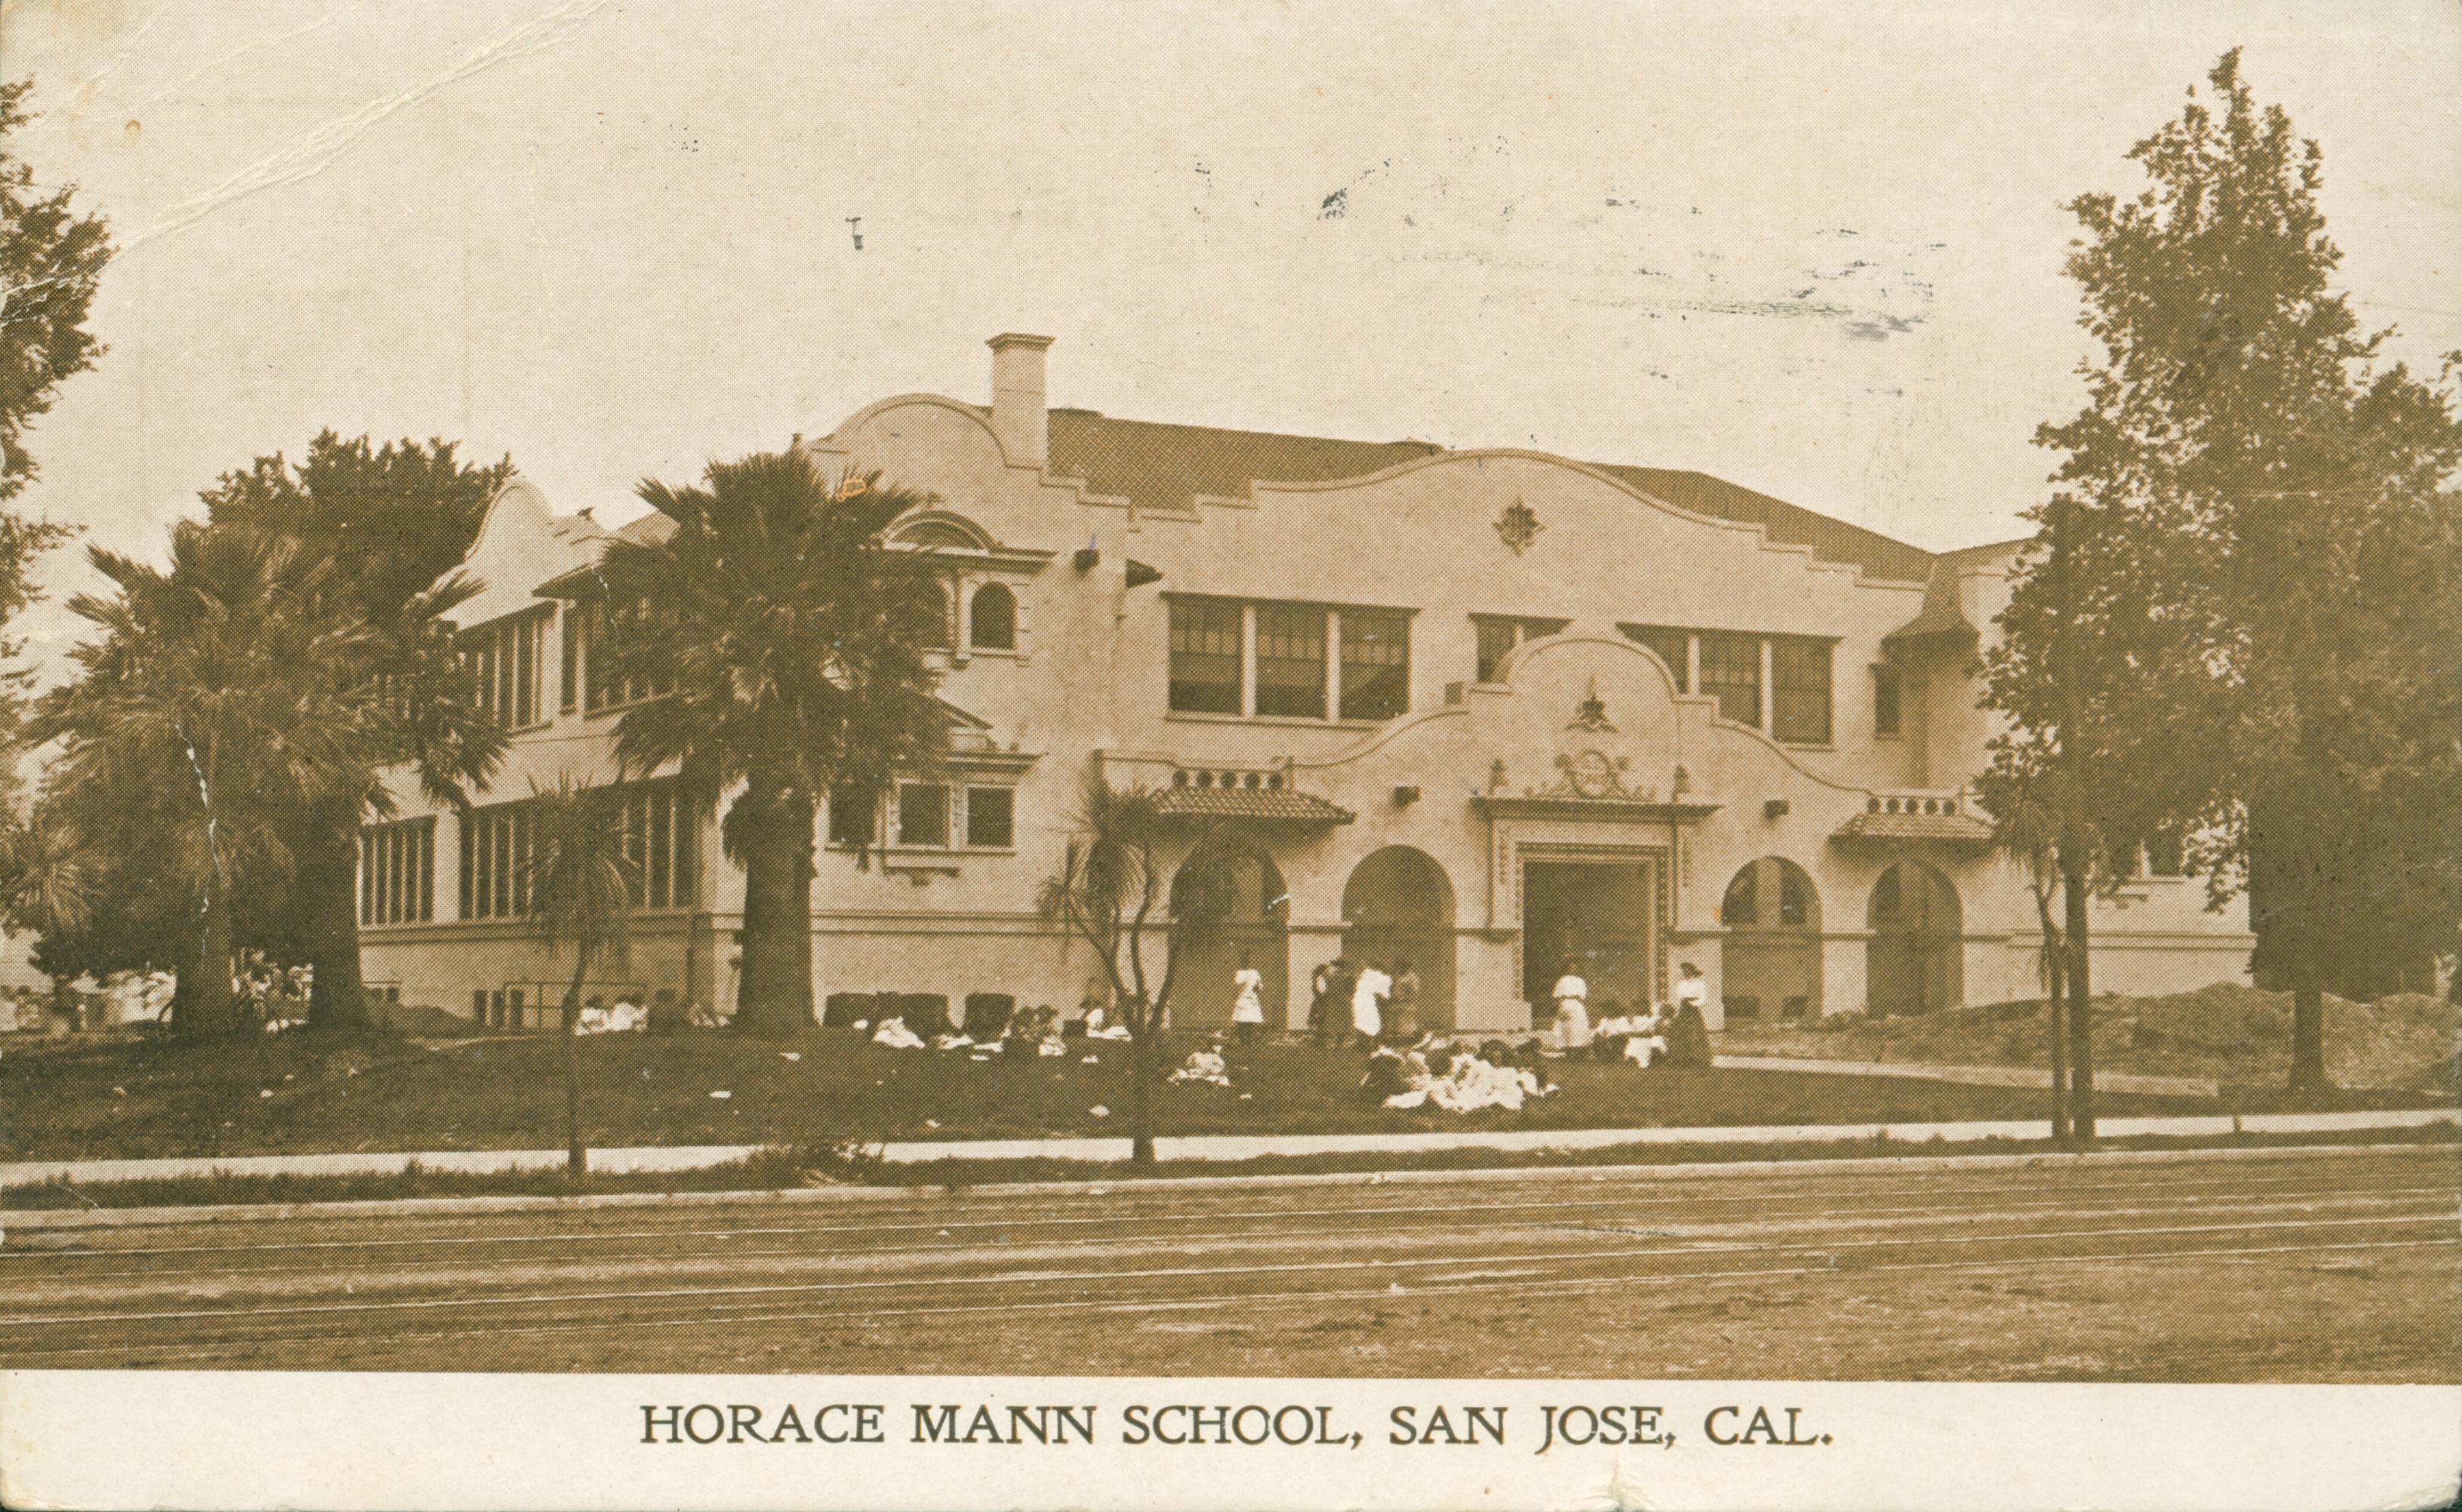 Shows the exterior of the Horace Mann School